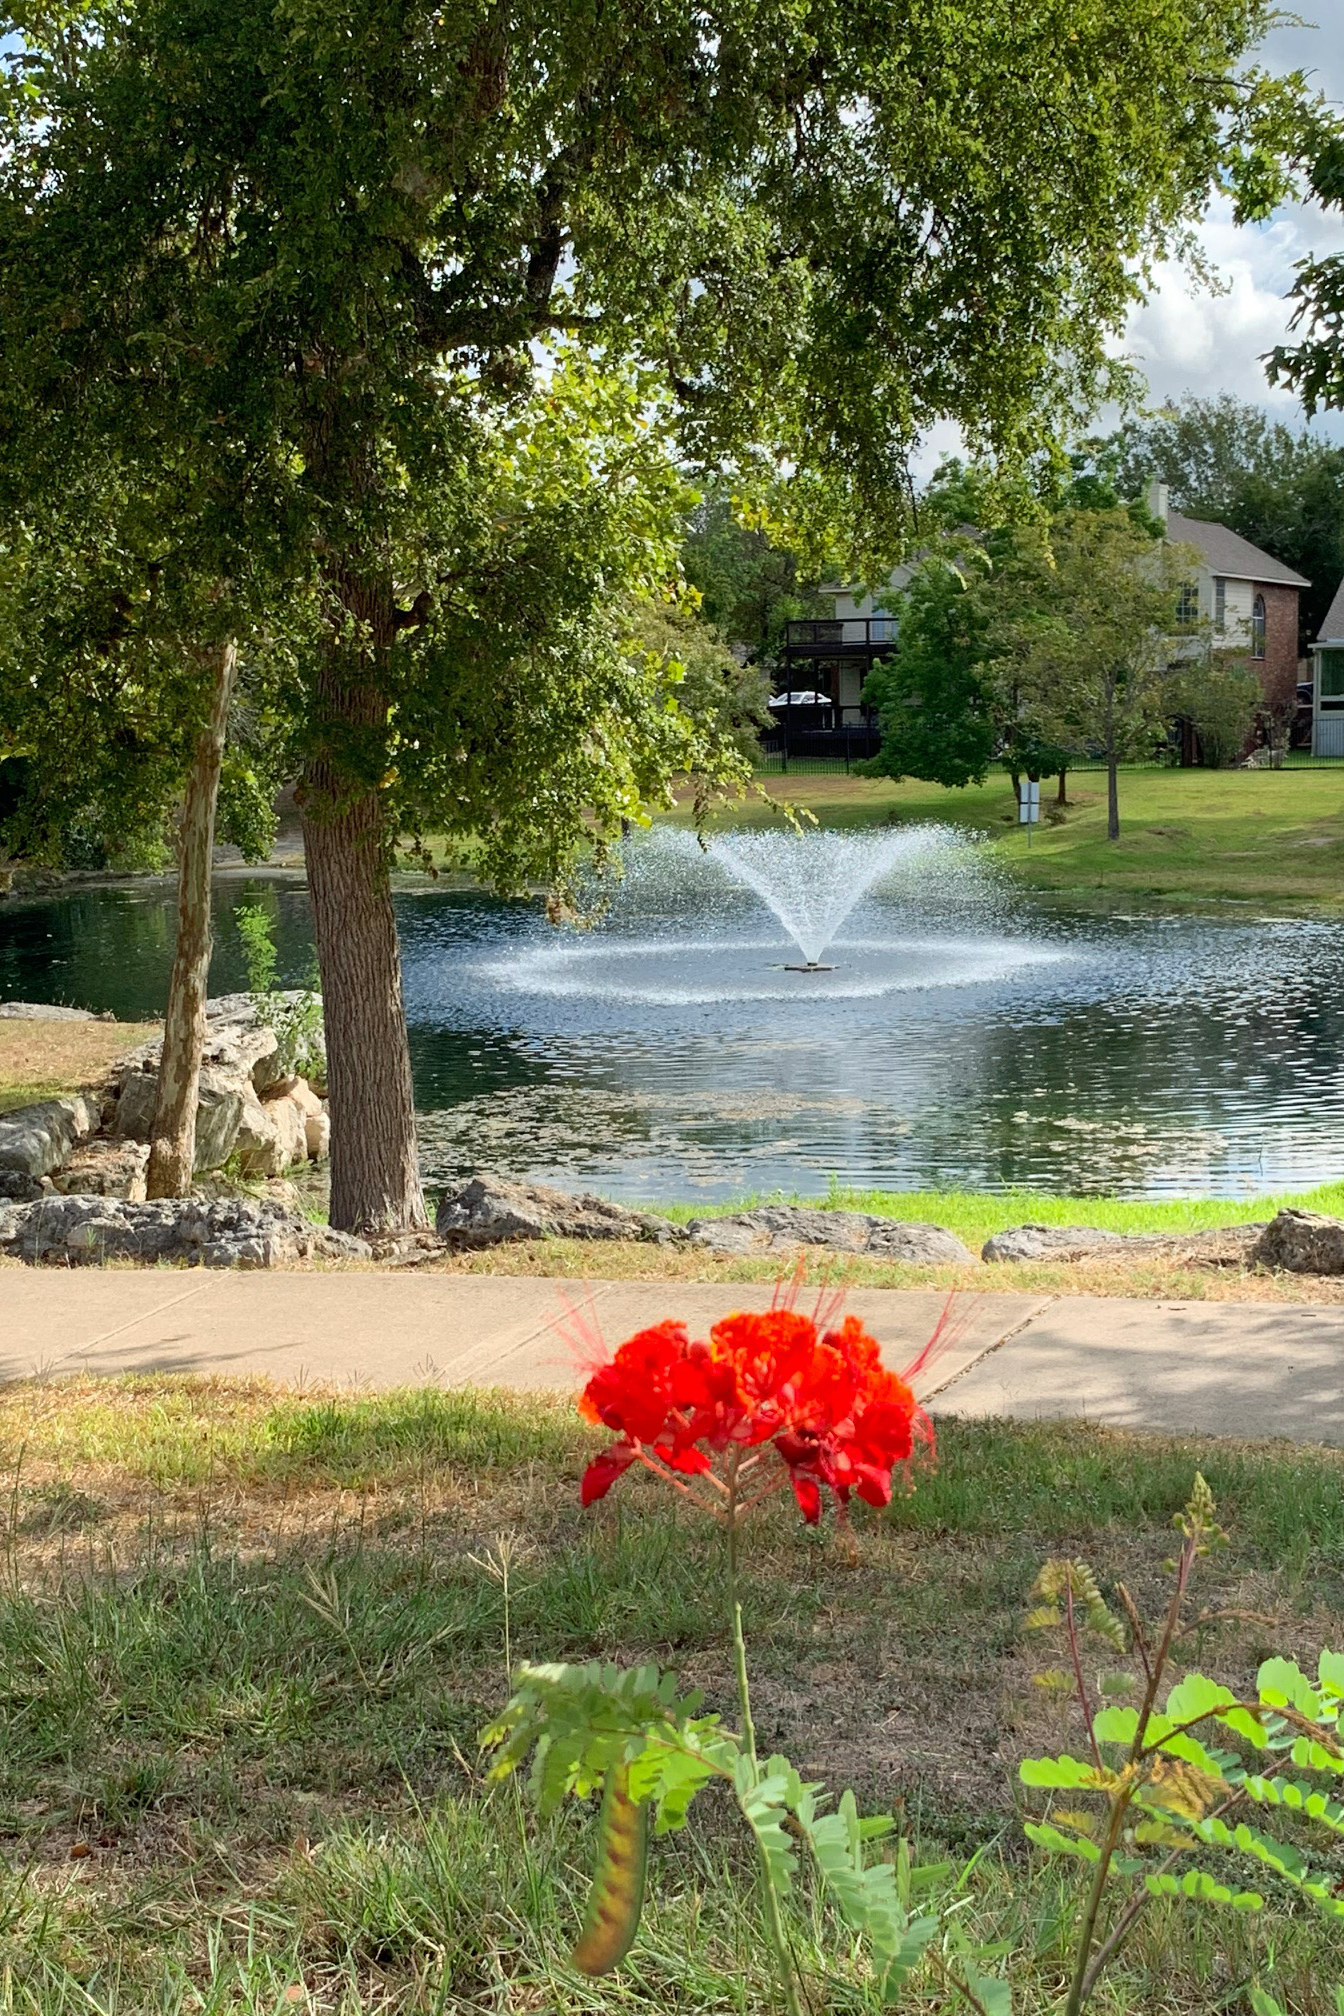 Picture of fountain in pond with flower in foreground.